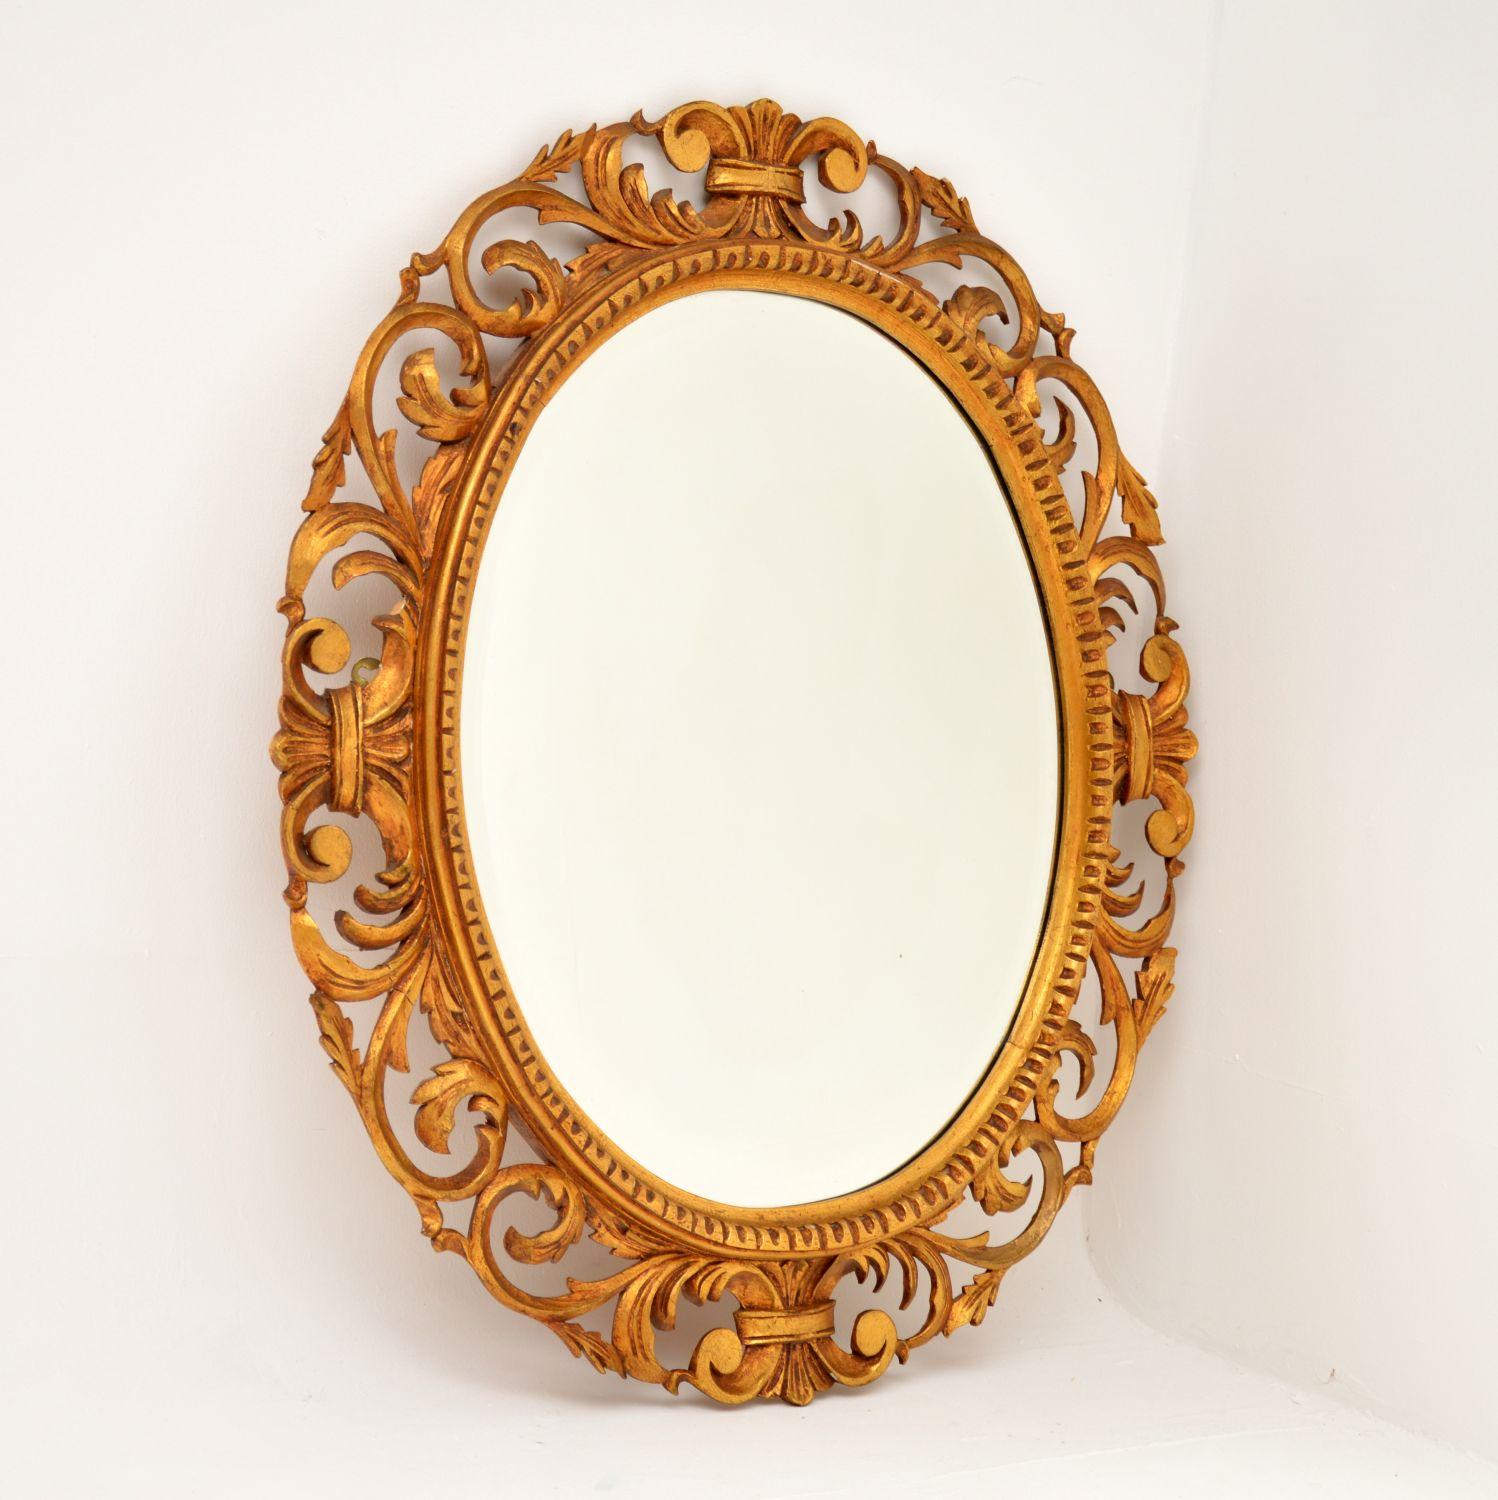 A stunning antique French gilt wood mirror in the Rococo style. This was made in France, it dates from around the 1930’s.

The quality is excellent, this has beautiful and intricate carving all over the oval frame. The gilt has a lovely finish and